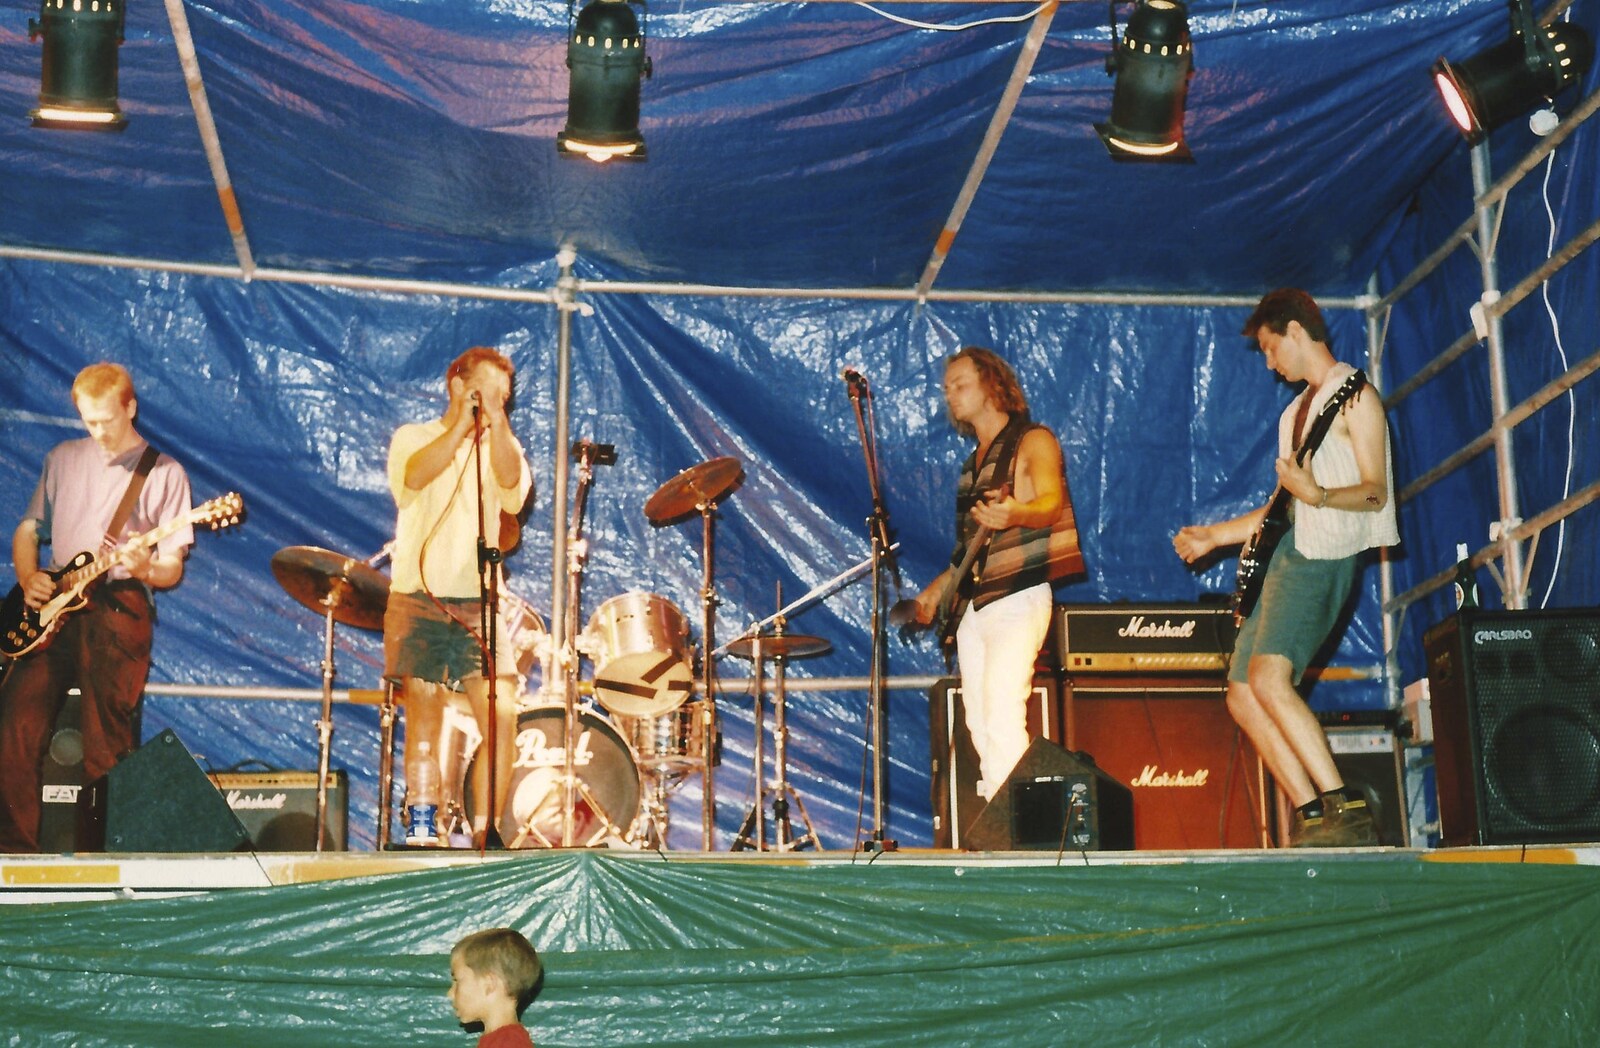 More band action from Sean's ElstedBury Festival, Elsted, West Sussex - 12th July 1996